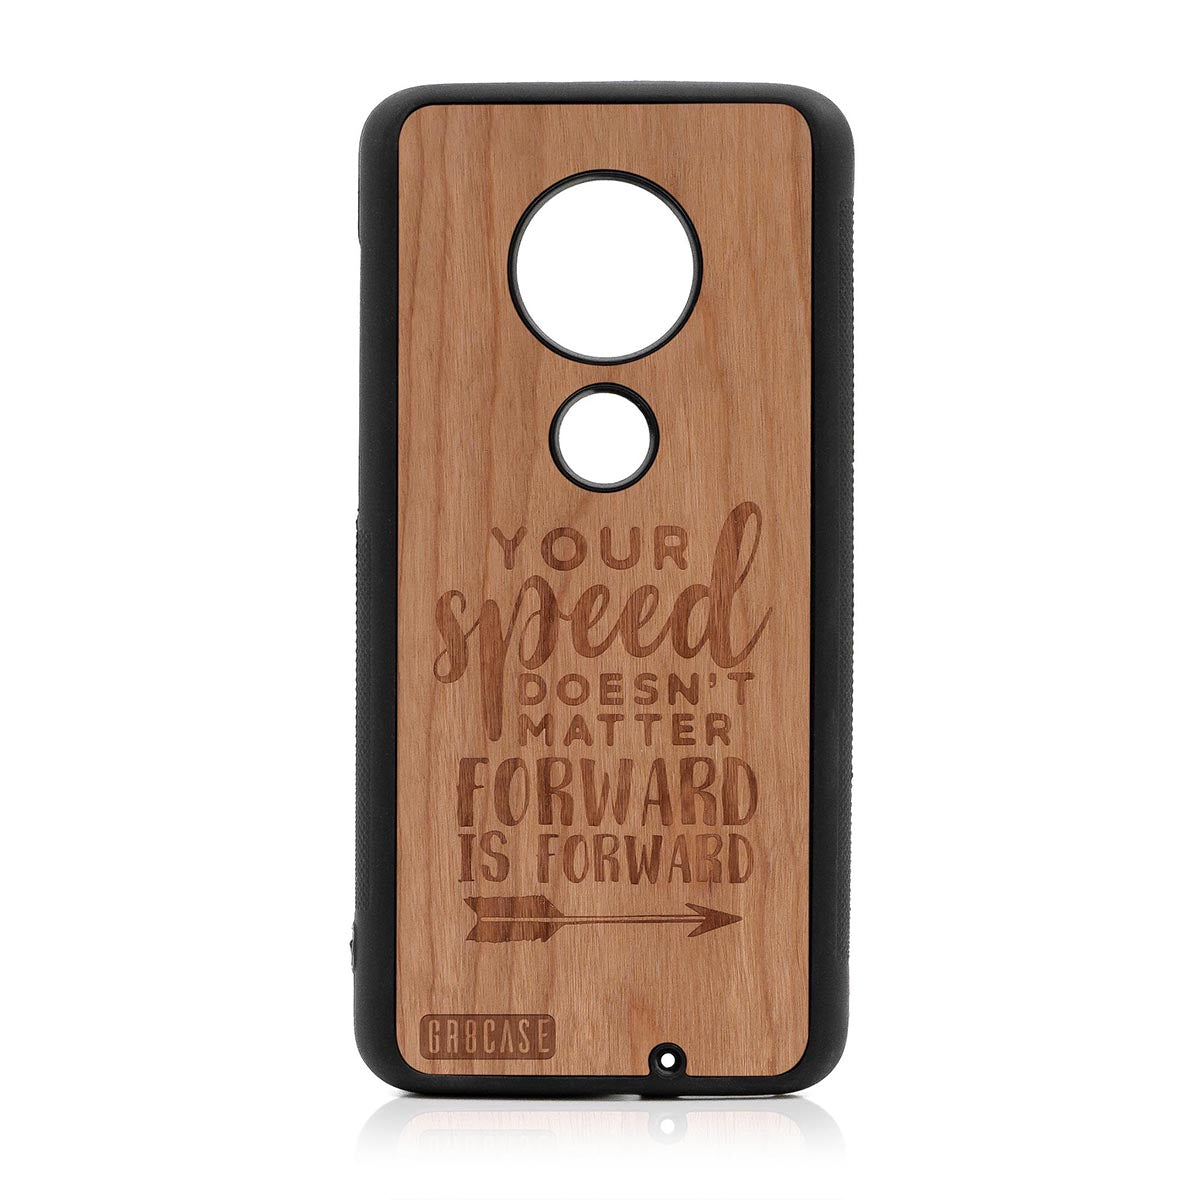 Your Speed Doesn't Matter Forward Is Forward Design Wood Case Moto G7 Plus